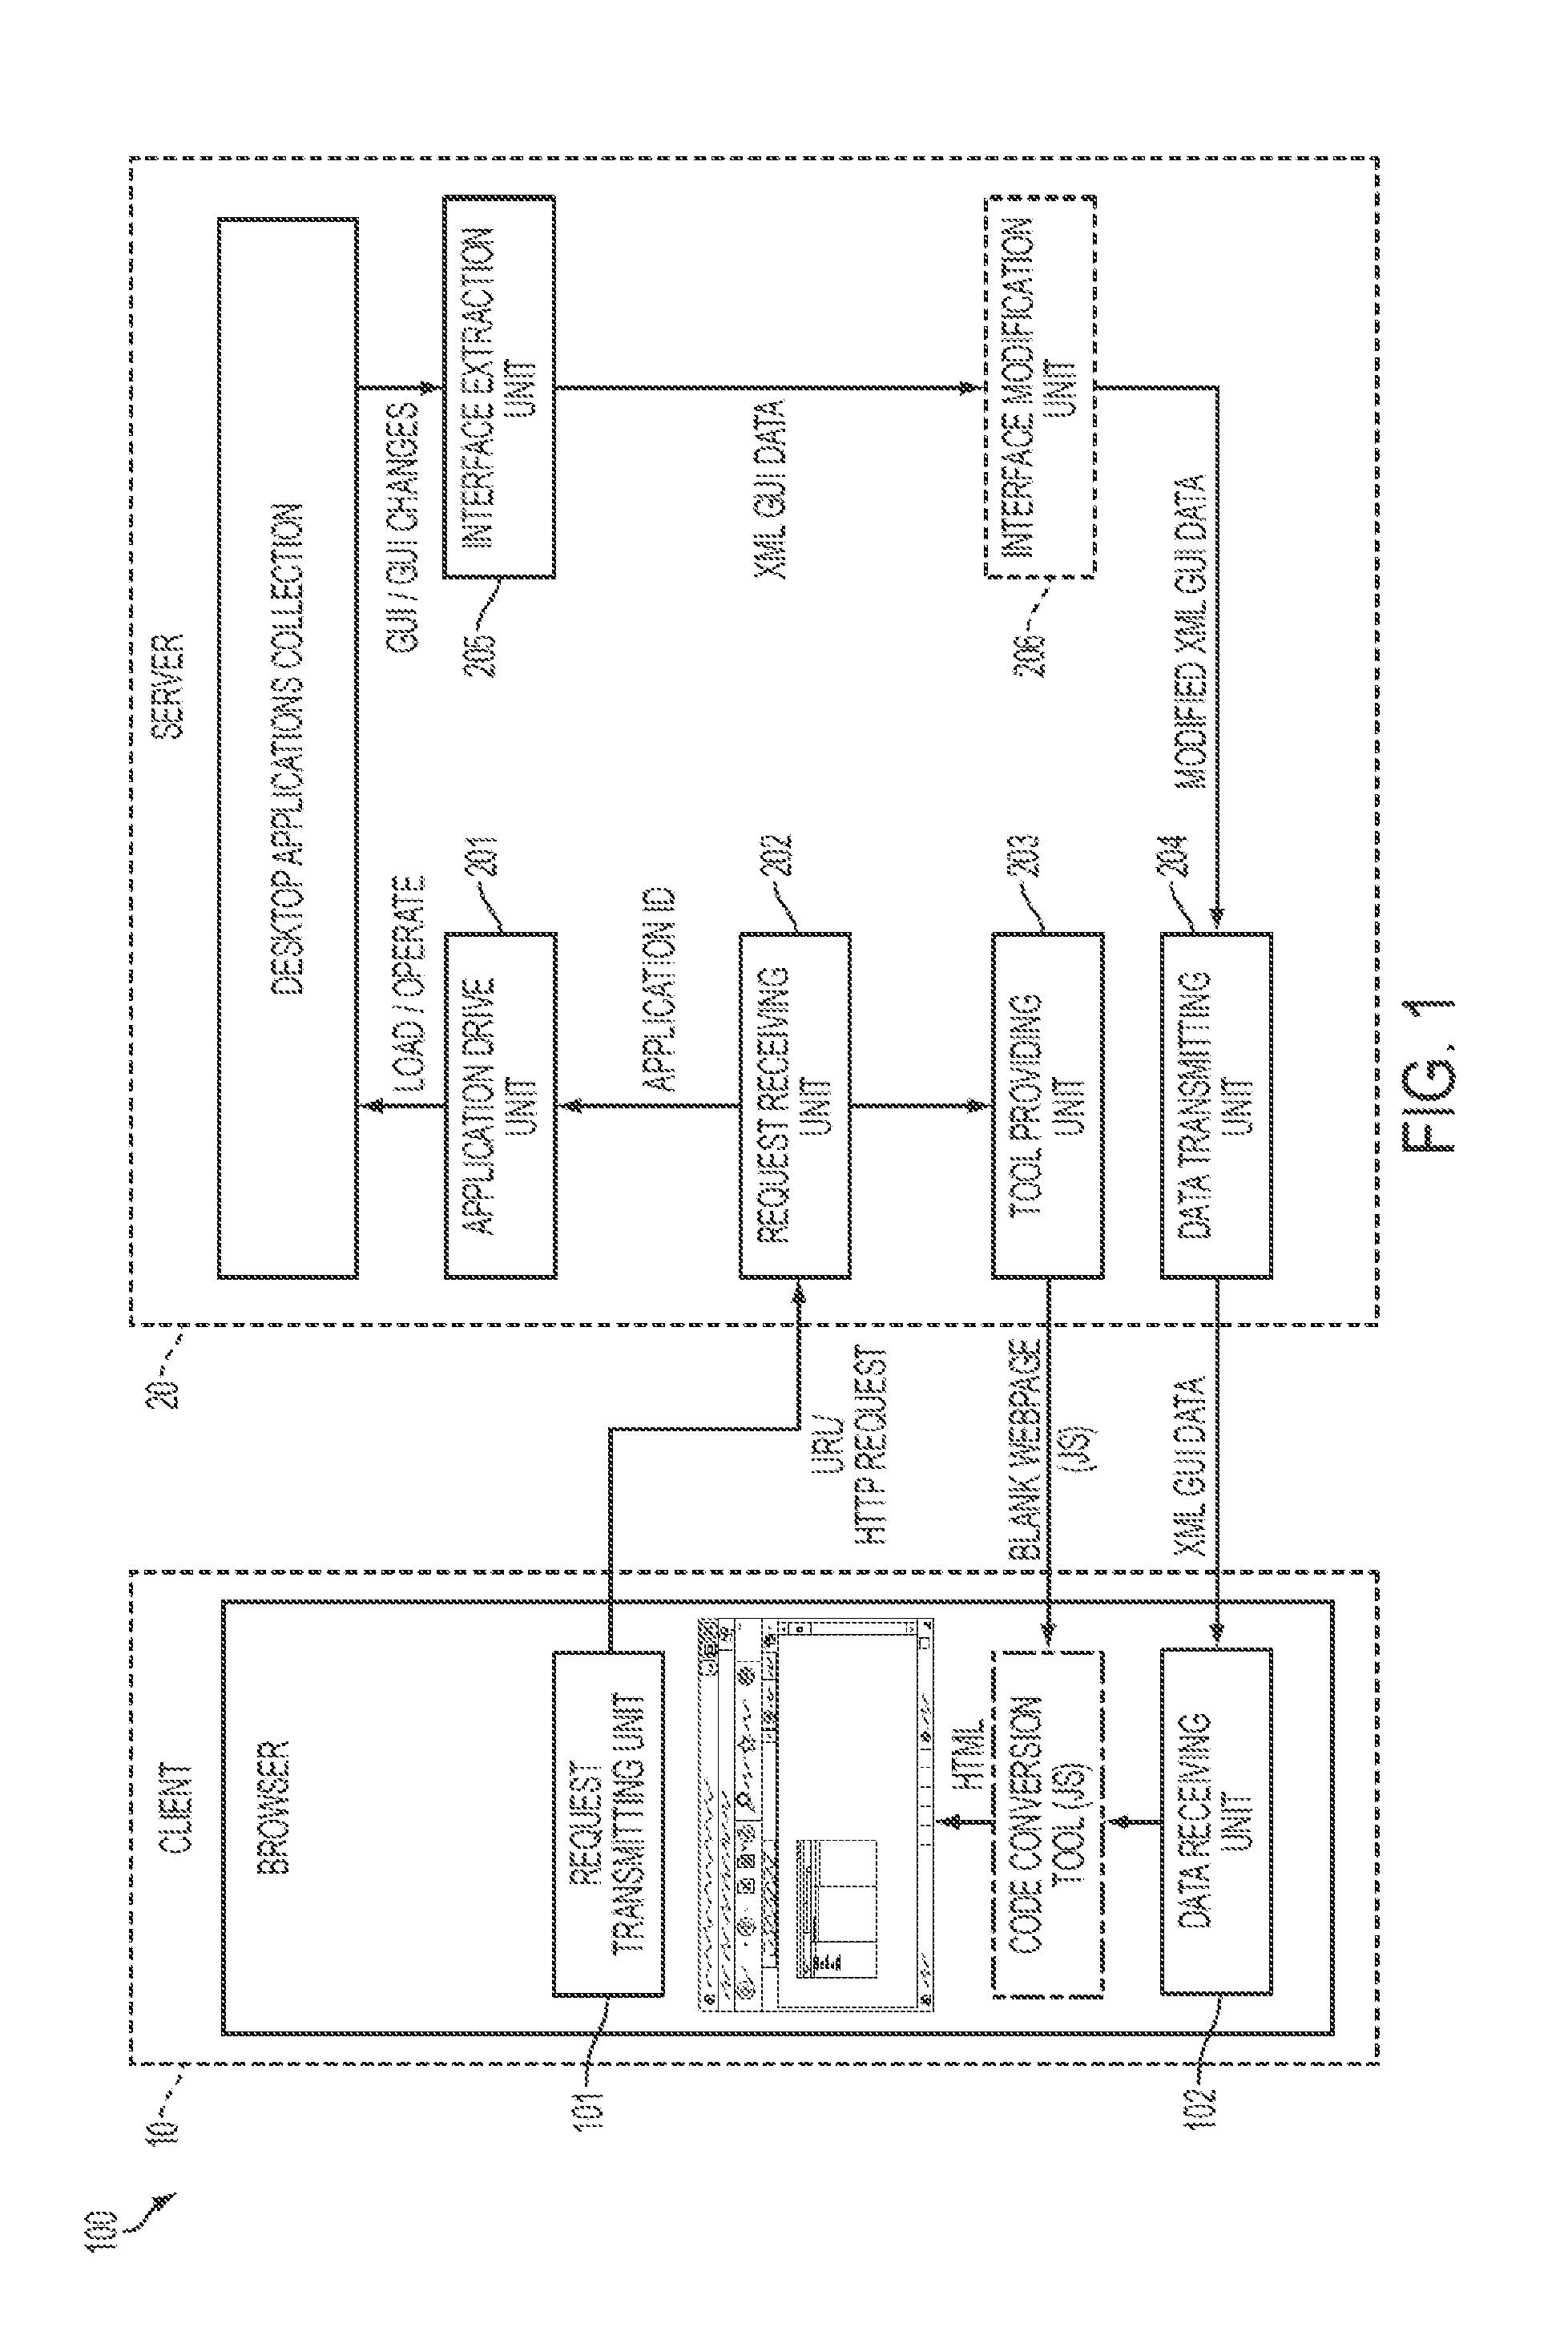 Method and system for converting desktop application to web application